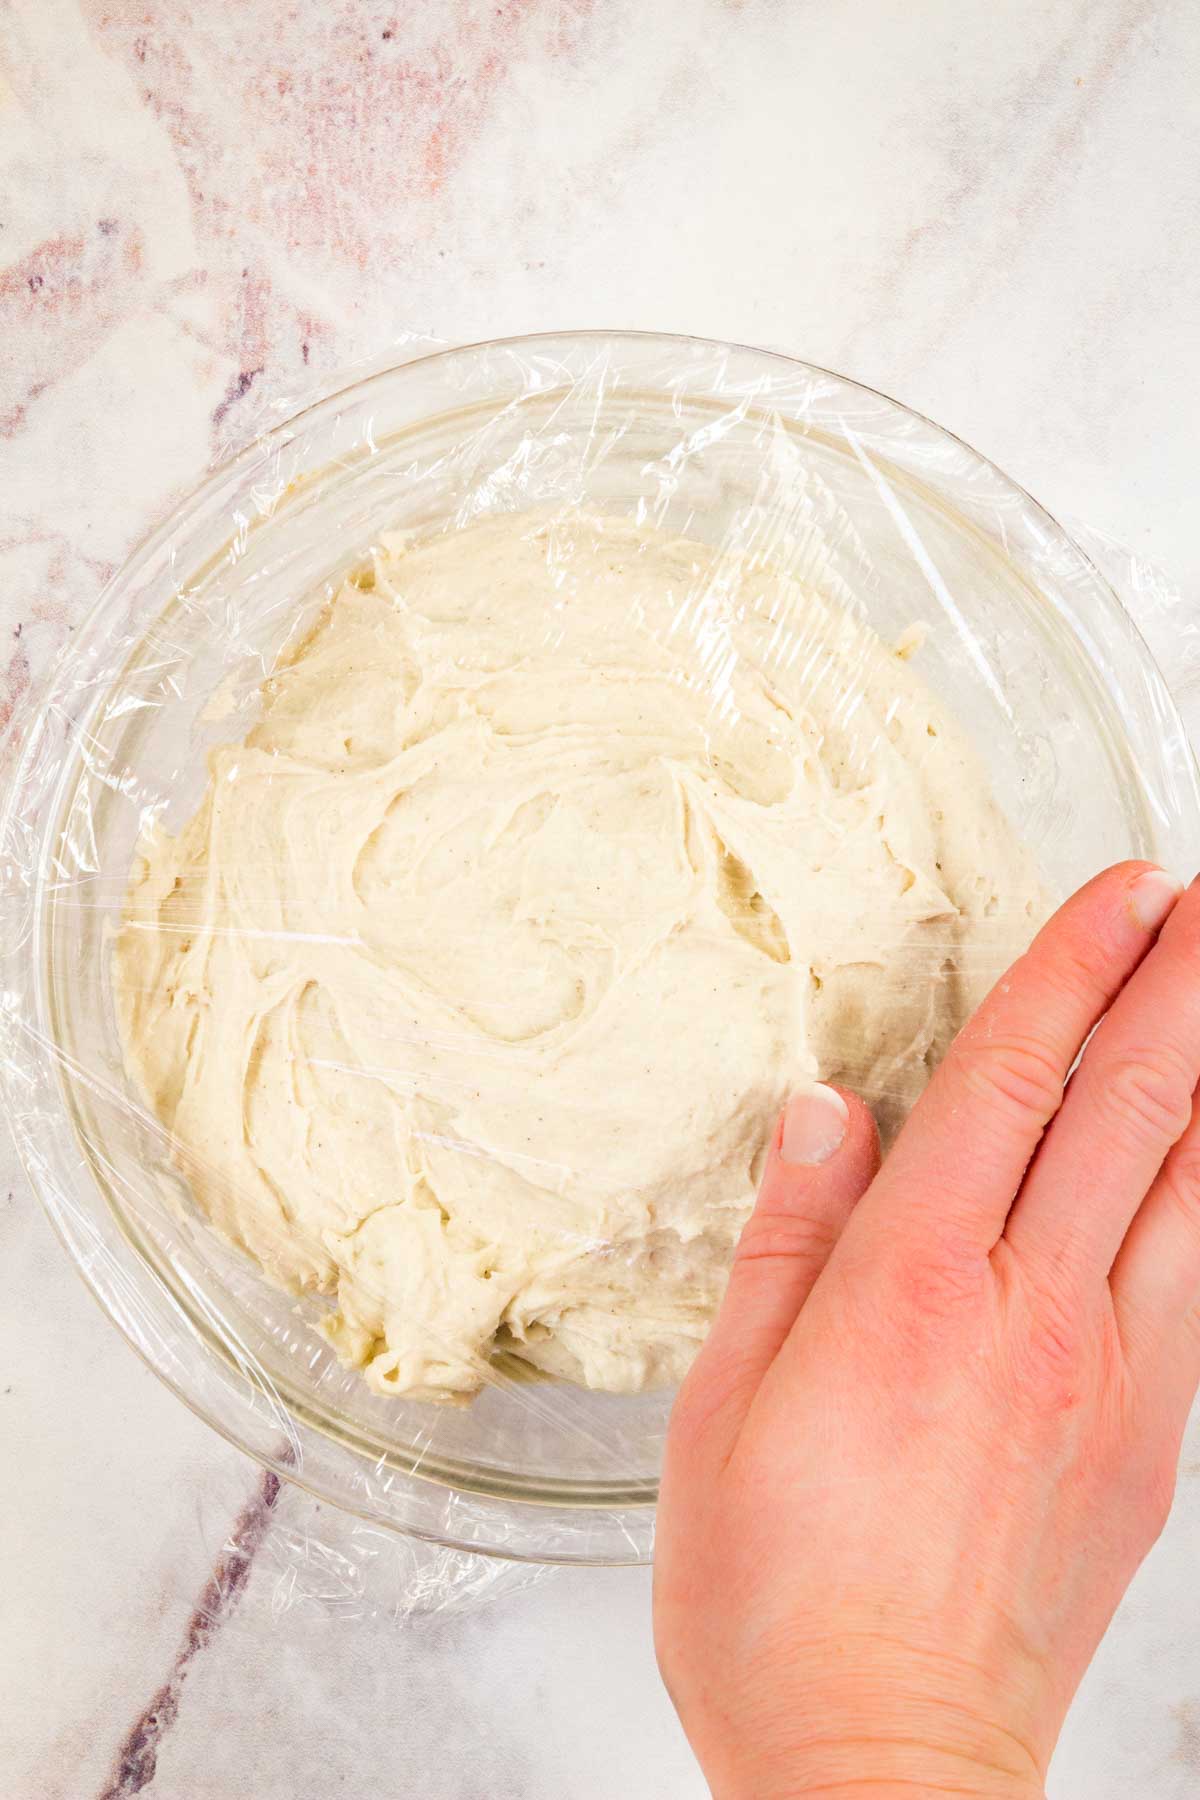 A hand covers a bowl of English muffin dough with plastic wrap.